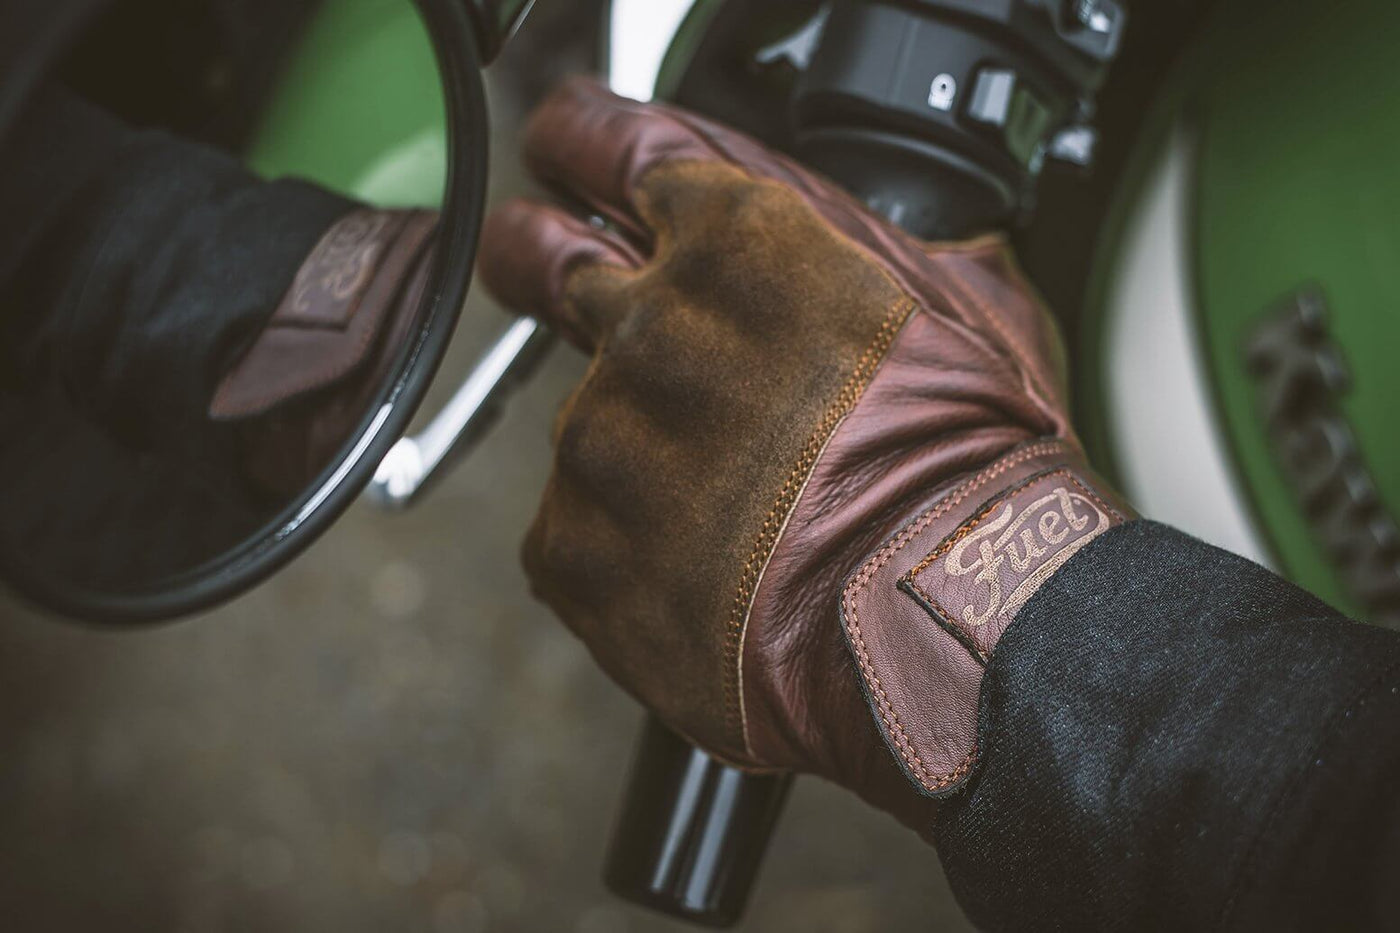 "RODEO" GLOVES BROWN